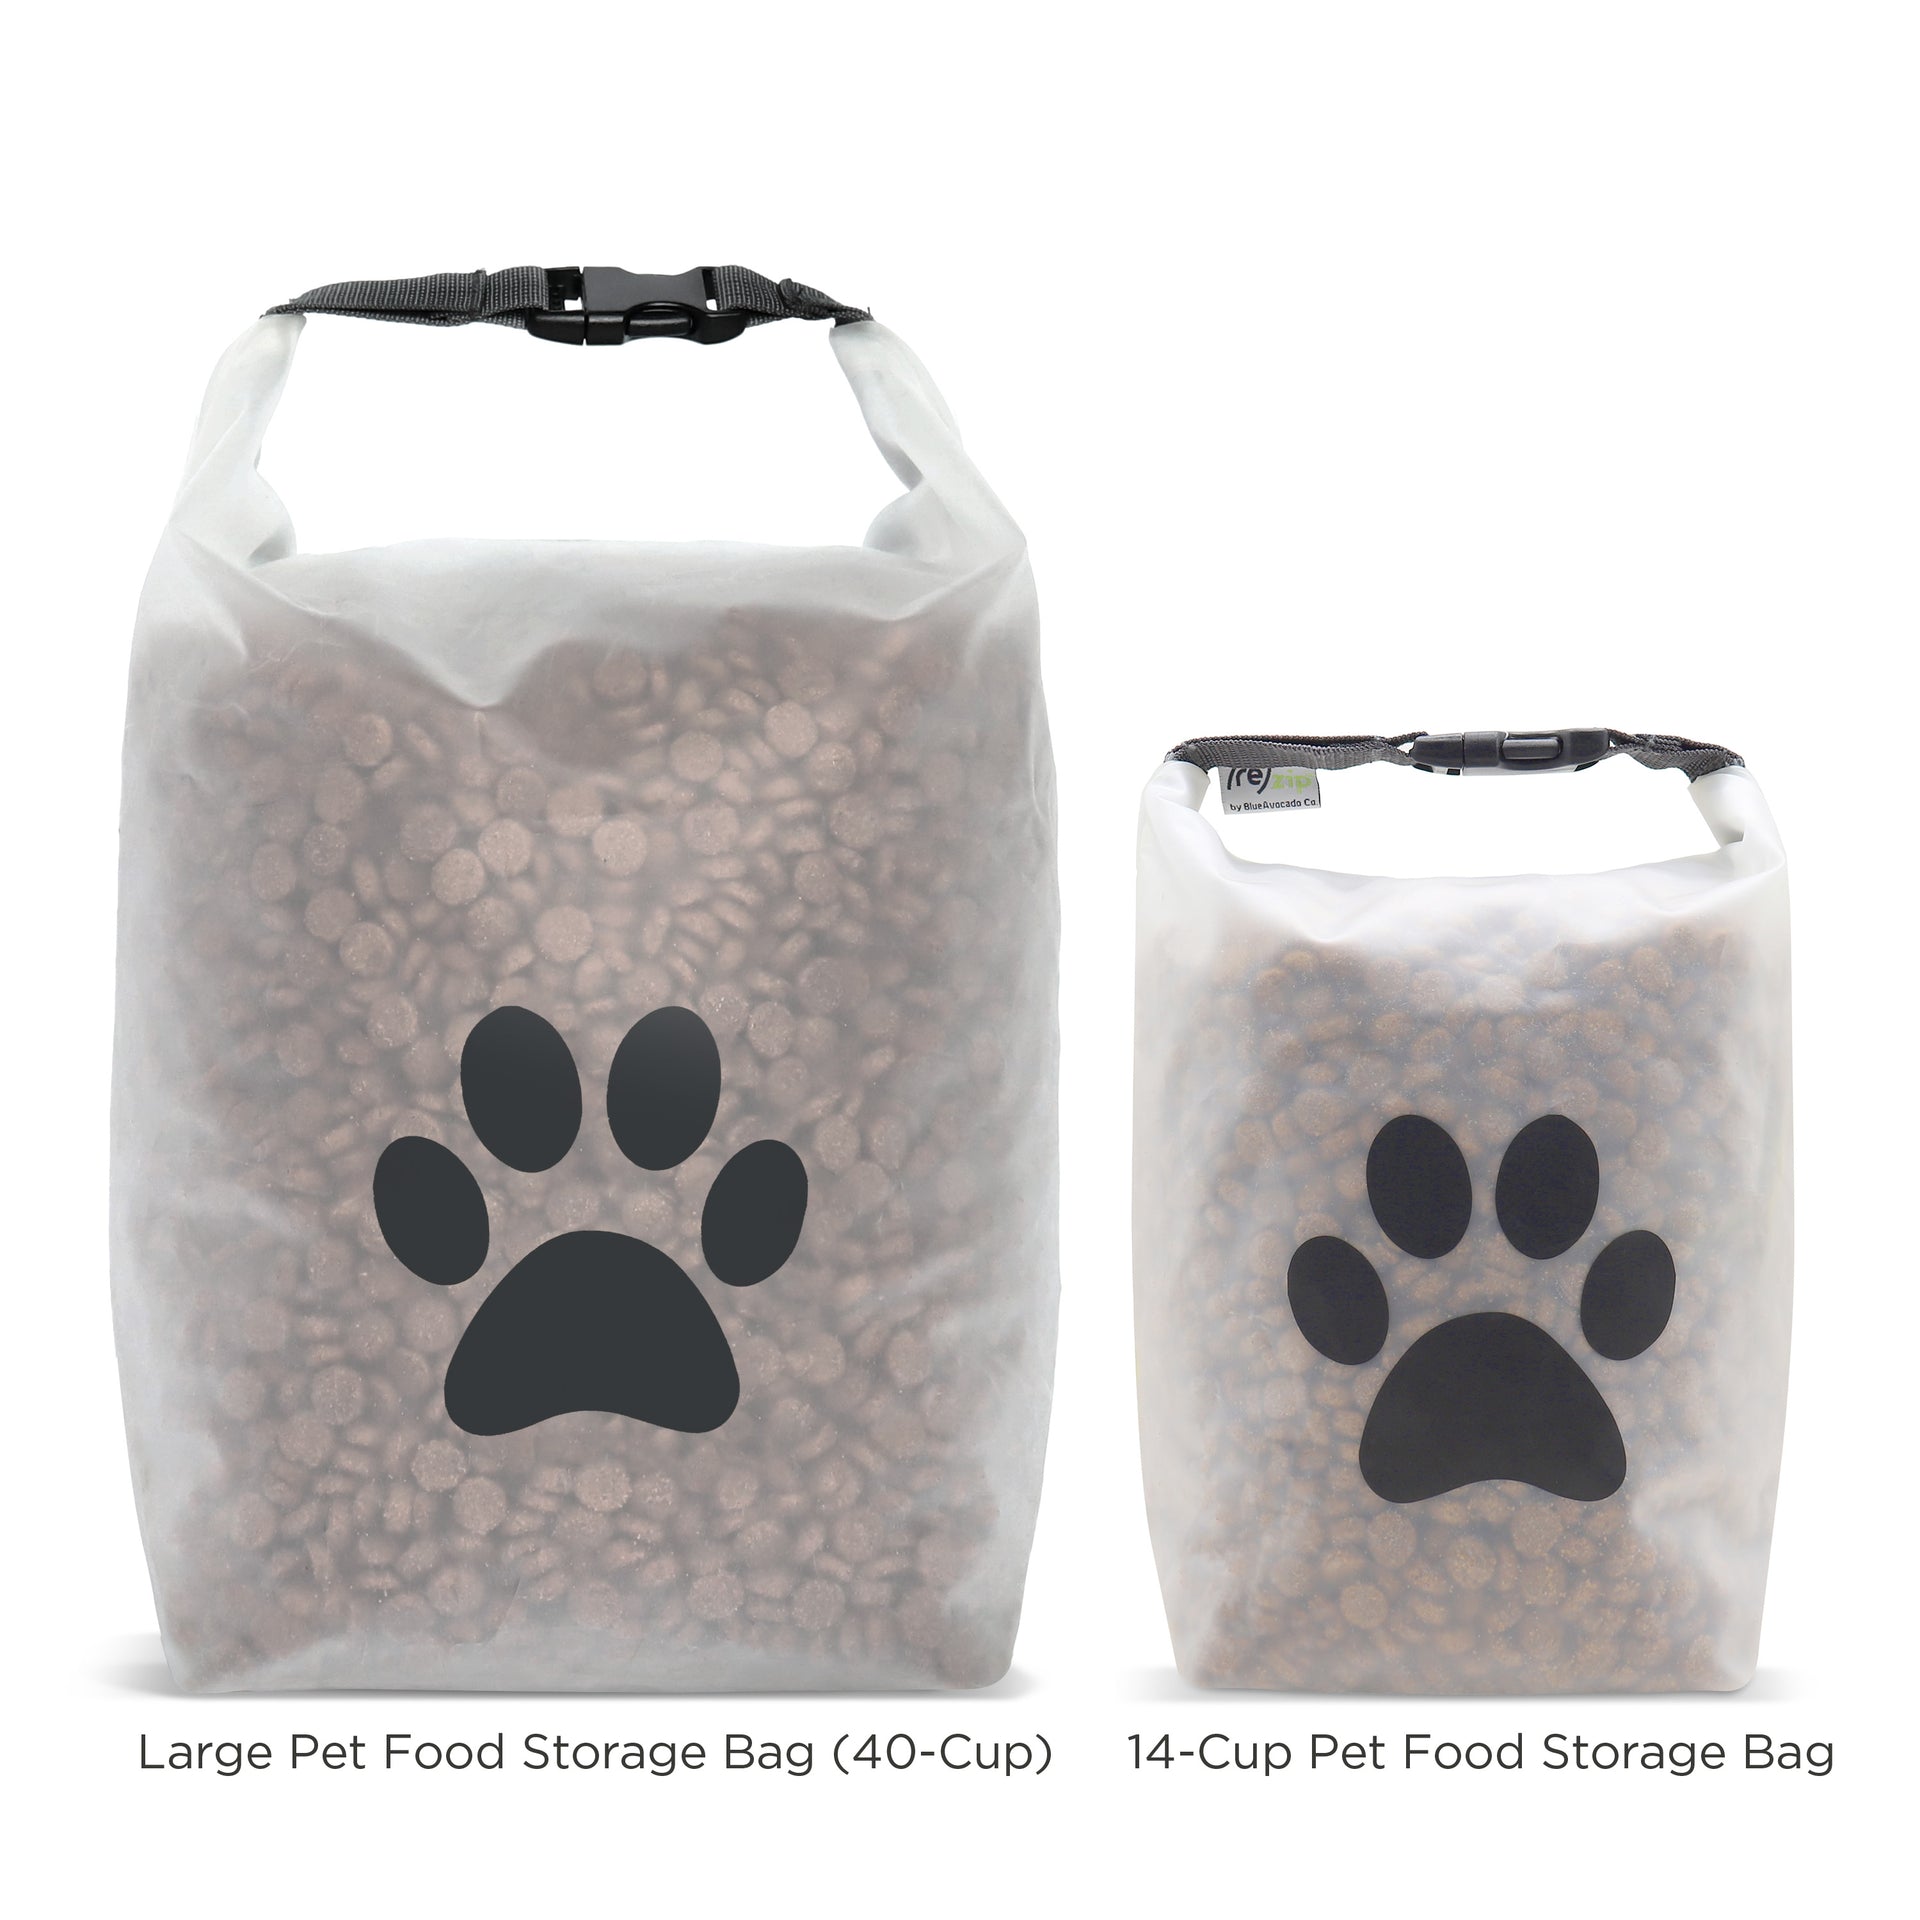 Pet Food Storage Containers / Kibble Carrier / Dog Food Containers for travel or at home